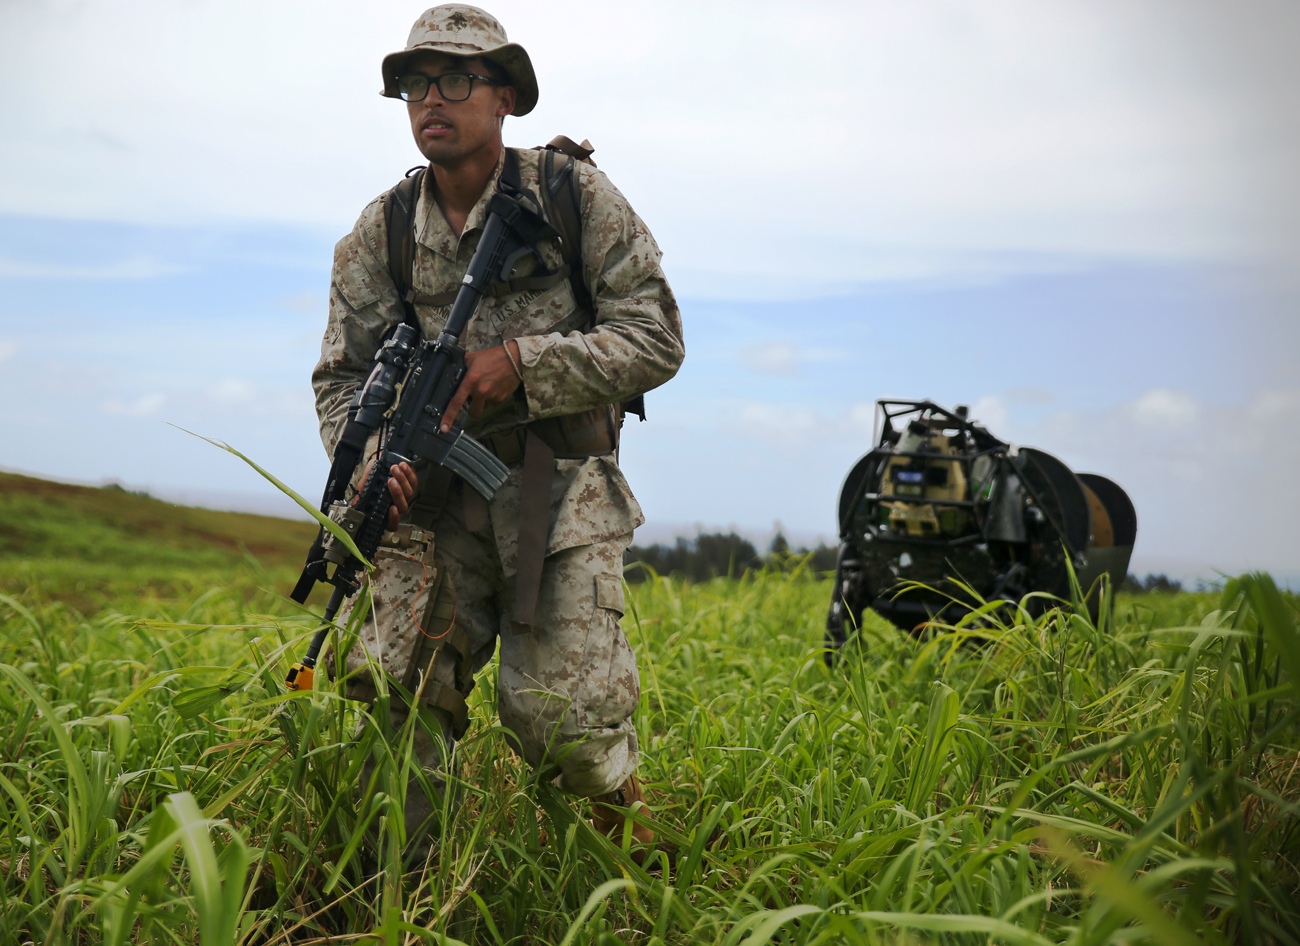 A marine and his machine. Lance Cpl. Brandon Dieckmann leads the LS3 in Hawaii (U.S. Marine Corps photo by Sgt. Sarah Dietz/RELEASED)